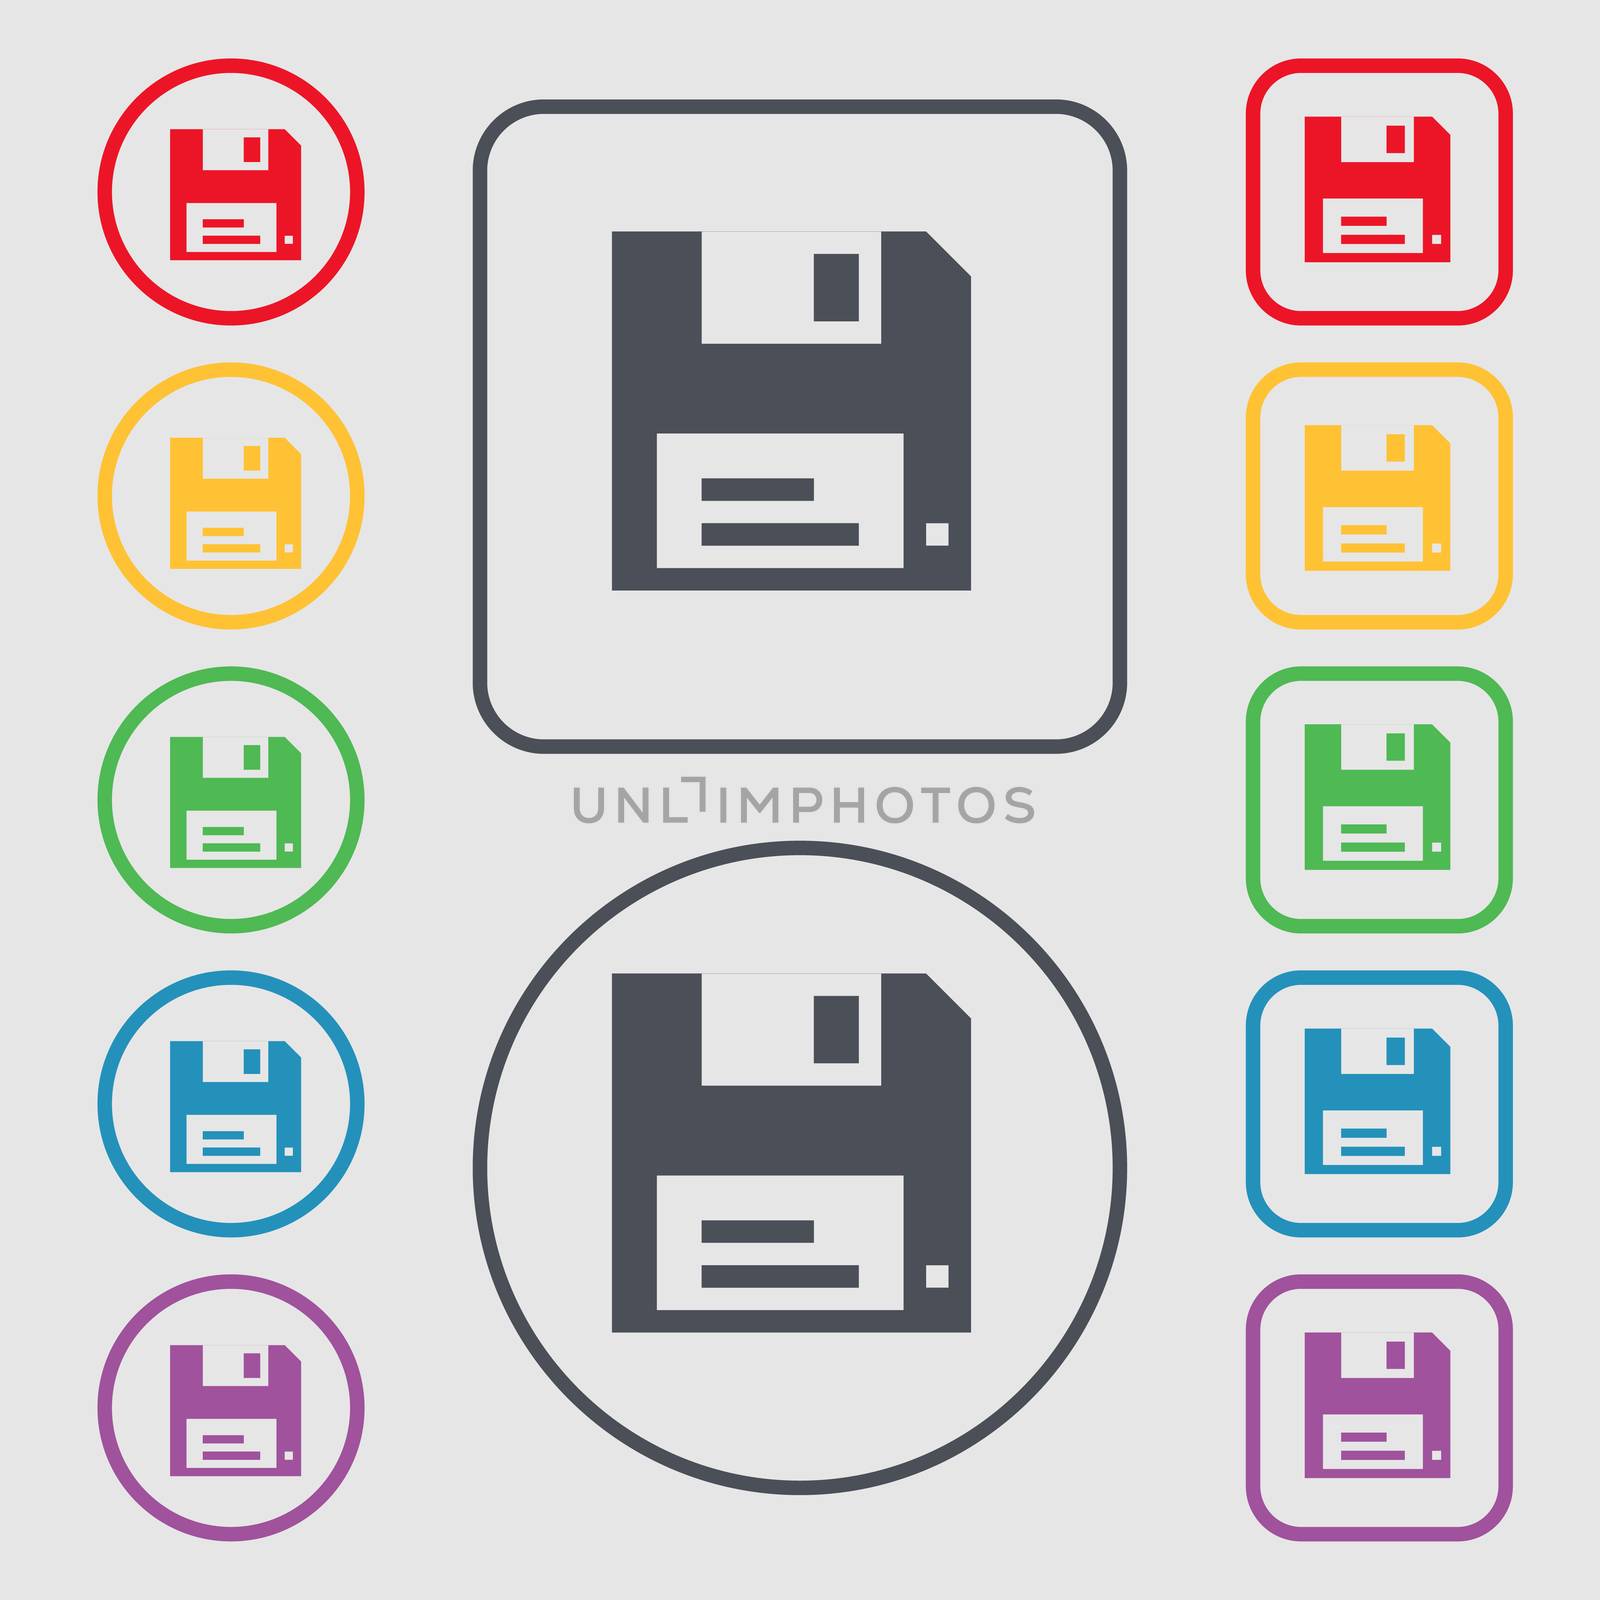 floppy icon sign. symbol on the Round and square buttons with frame. illustration